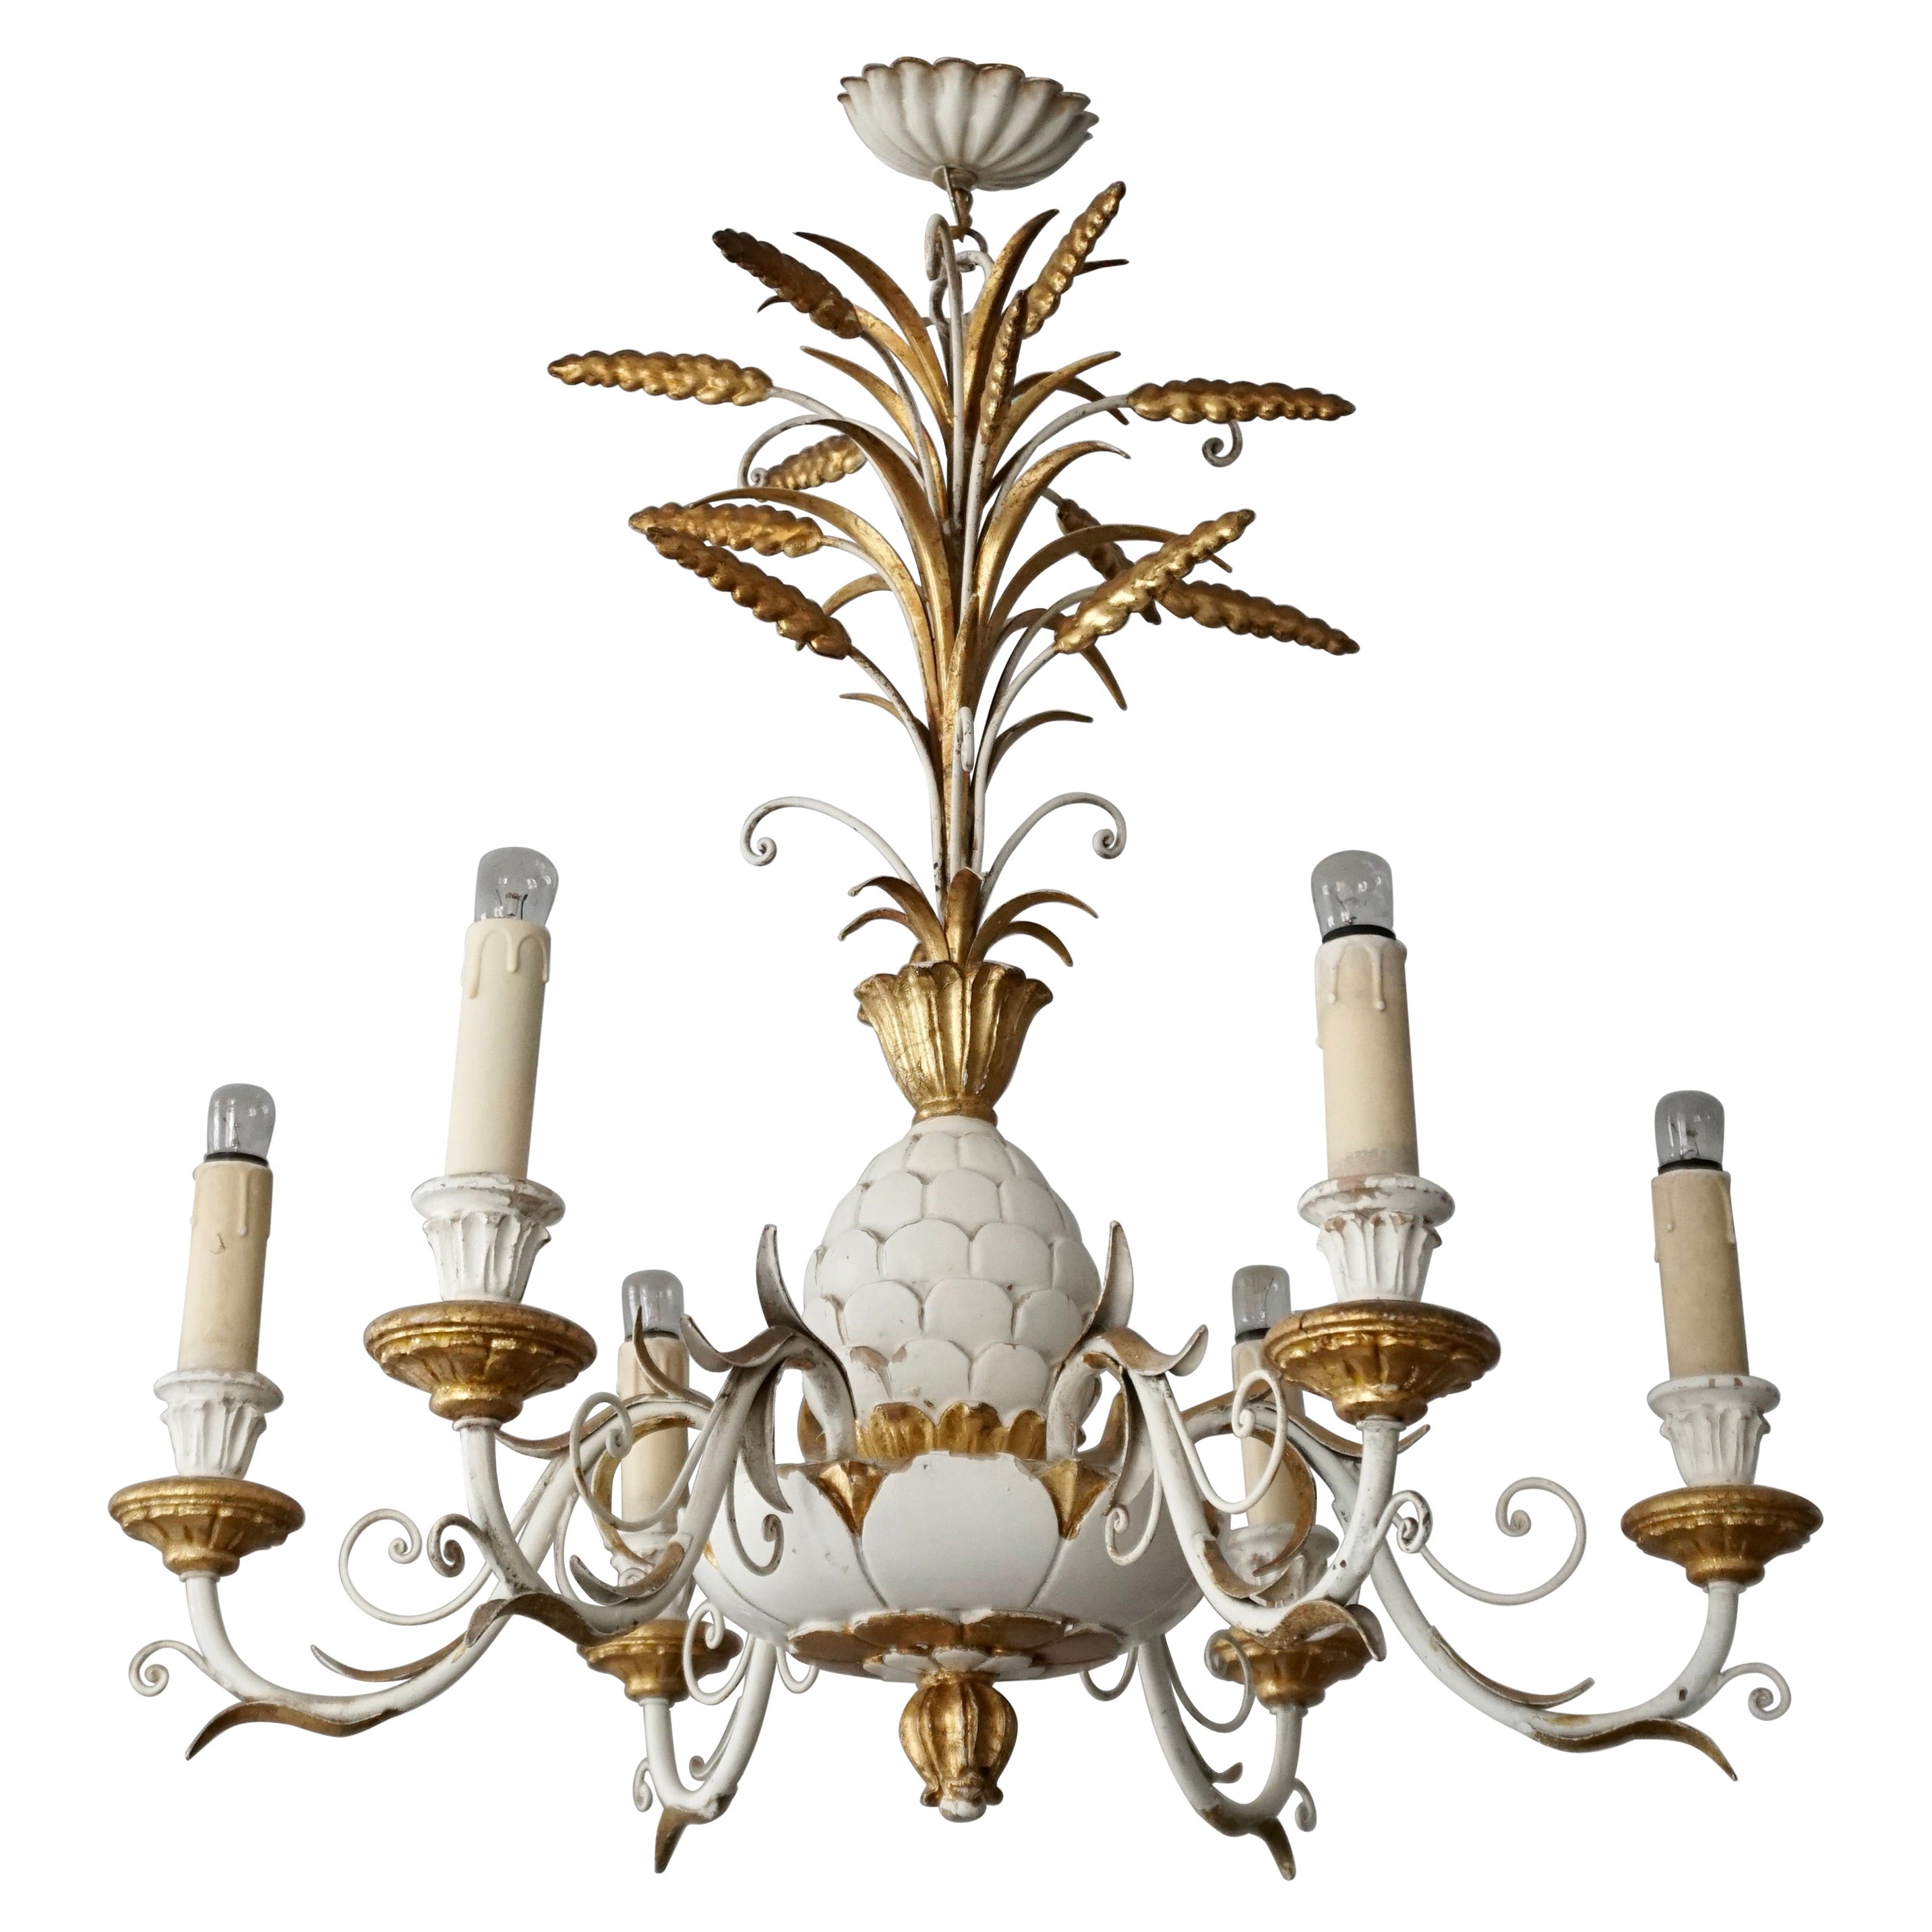 Italian Tole and Brass Pineapple and Palm Leaf Chandelier For Sale